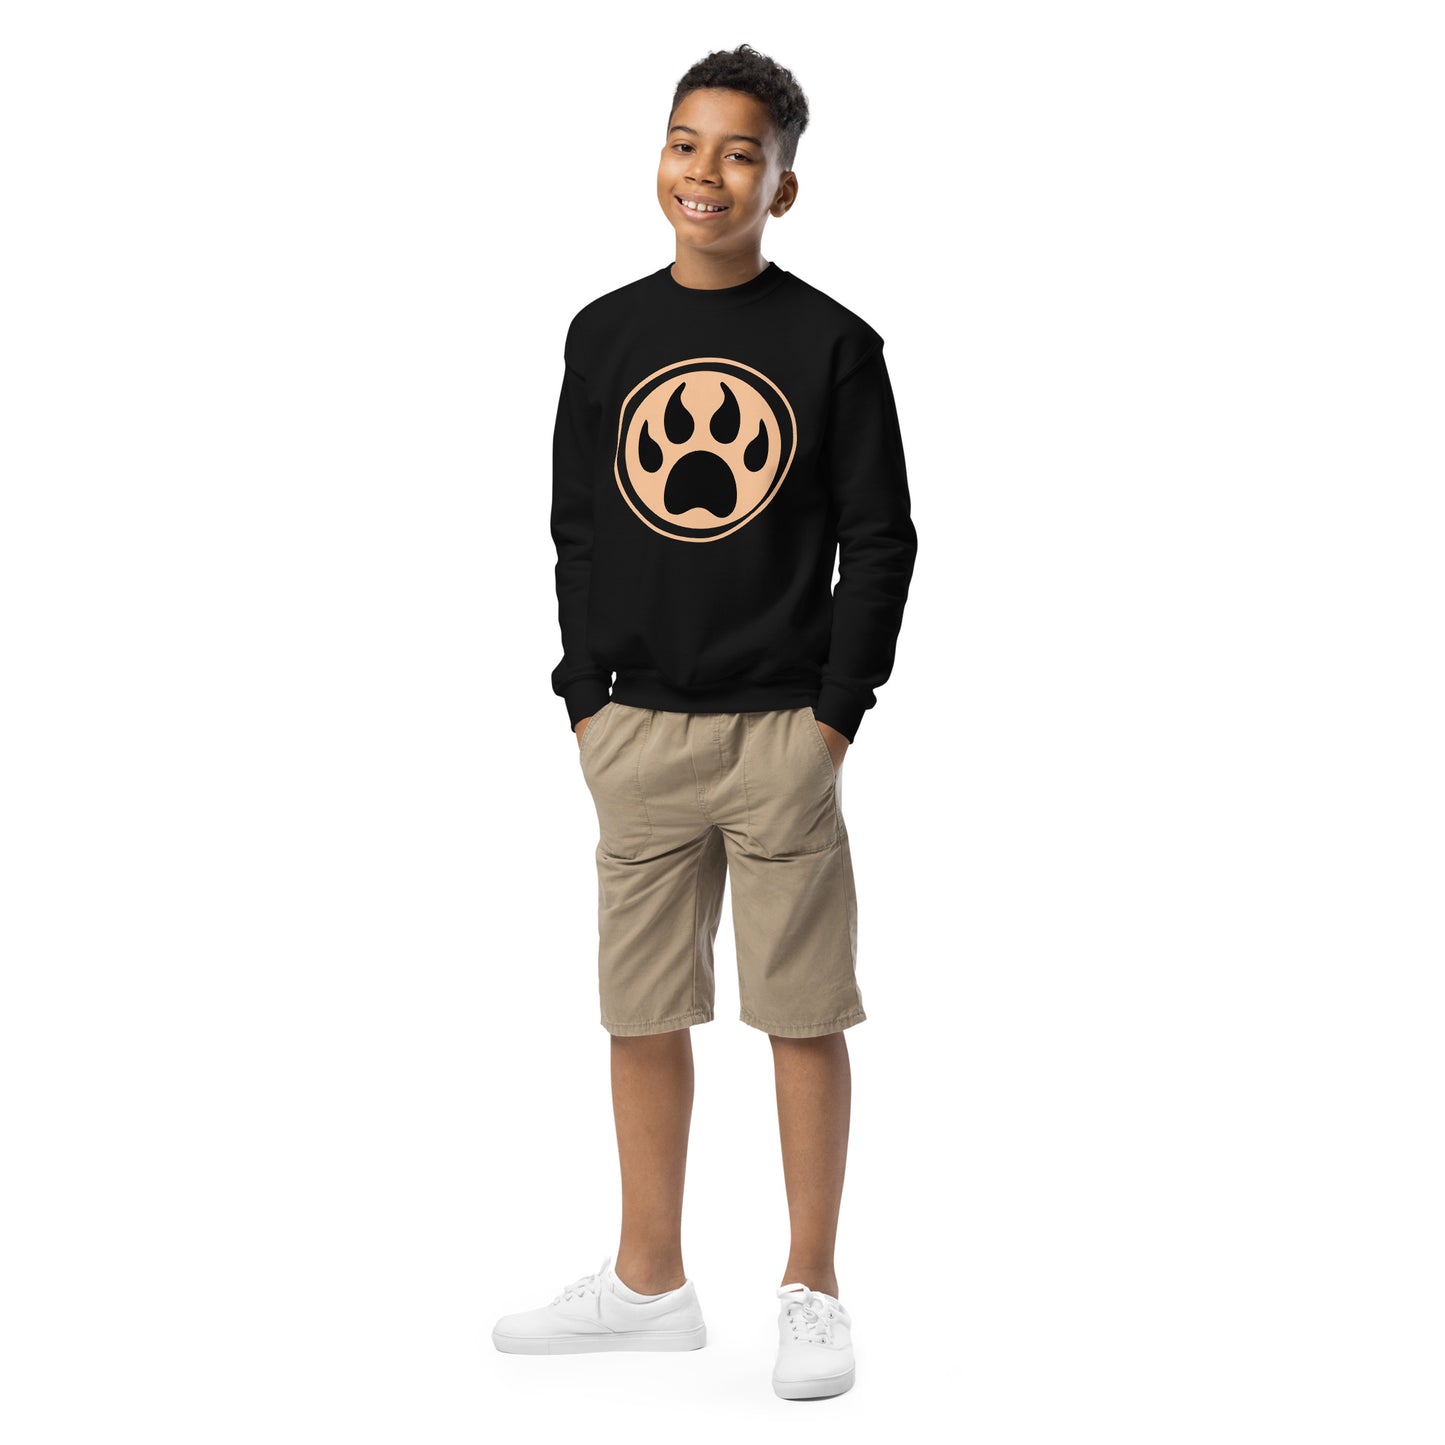 Youth with black sweatshirt and a print of a wolf claw